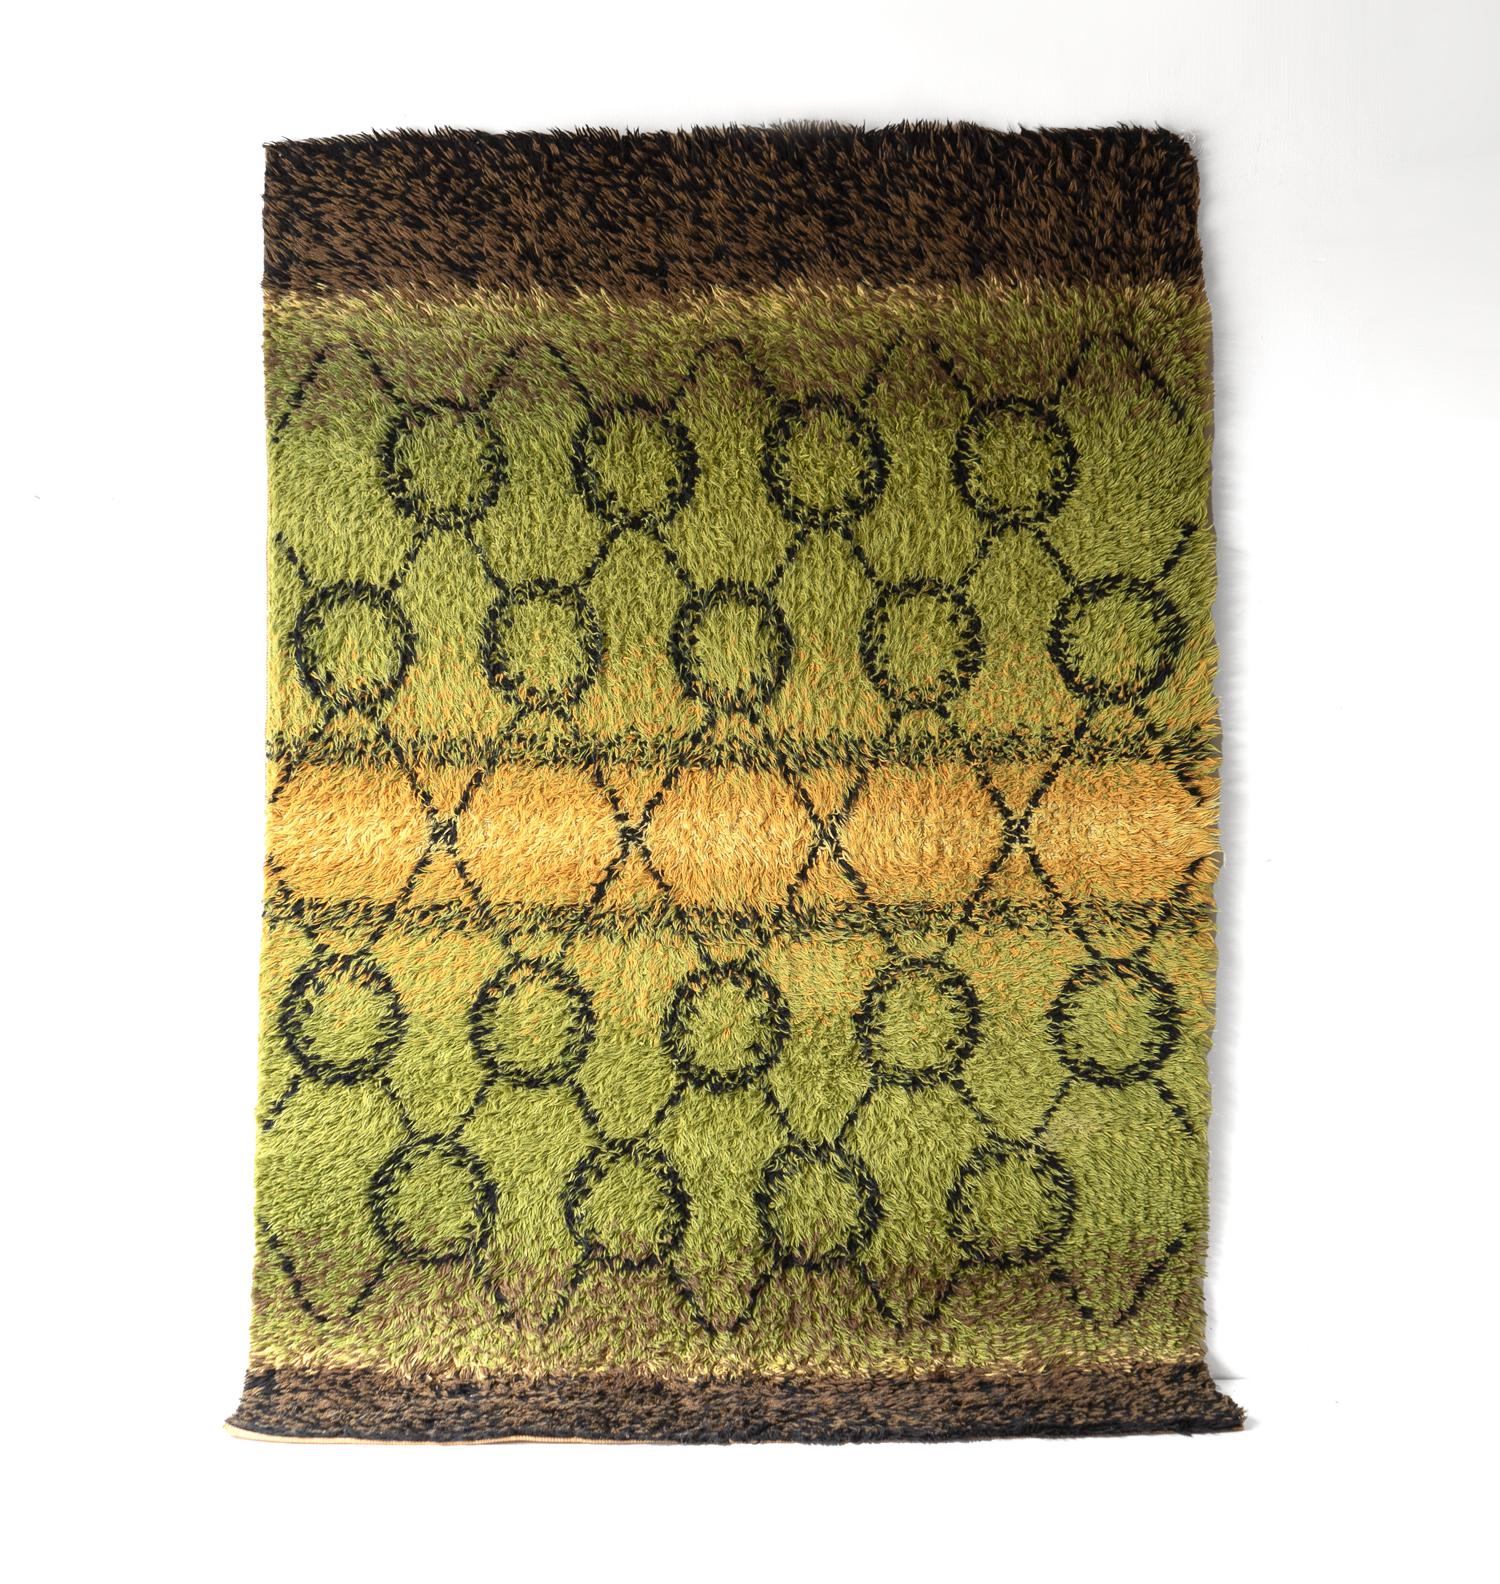 LARGE VINTAGE GREEN WOOL SHAG RUG , MID CENTURY RYA CARPET 1960S

A woven rug with a deep shag pile of mainly green ground with bands of yellow and brown flecked with black. With a linear black and rep4taed circle design.

Dating from the